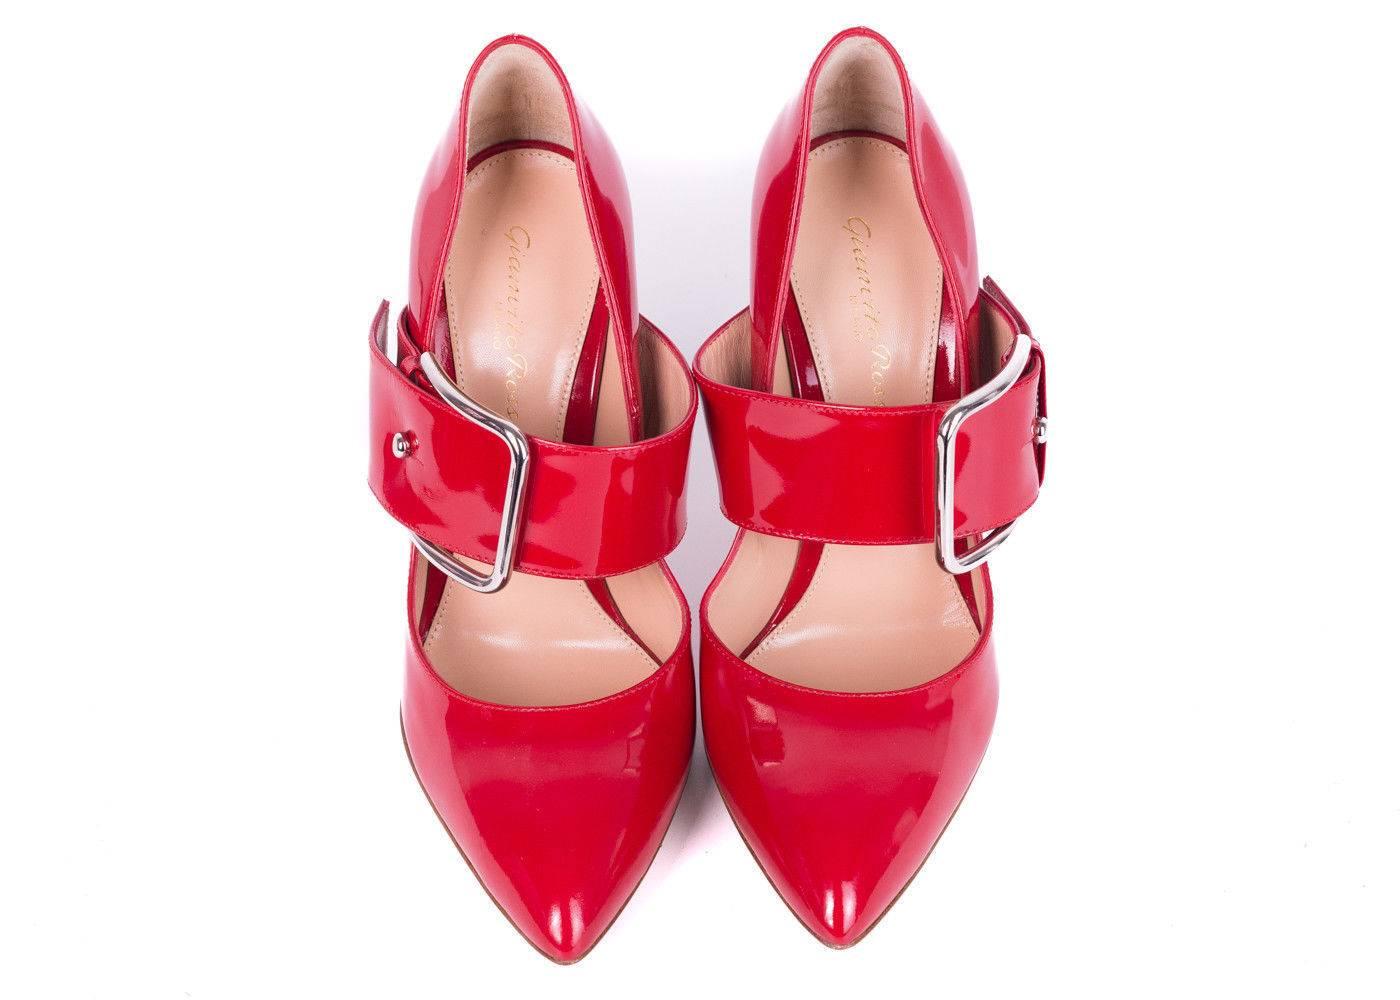 Gianvito Rossi Red Patent Leather MaryJane Pointed Toe Stiletto Heels In New Condition For Sale In Brooklyn, NY